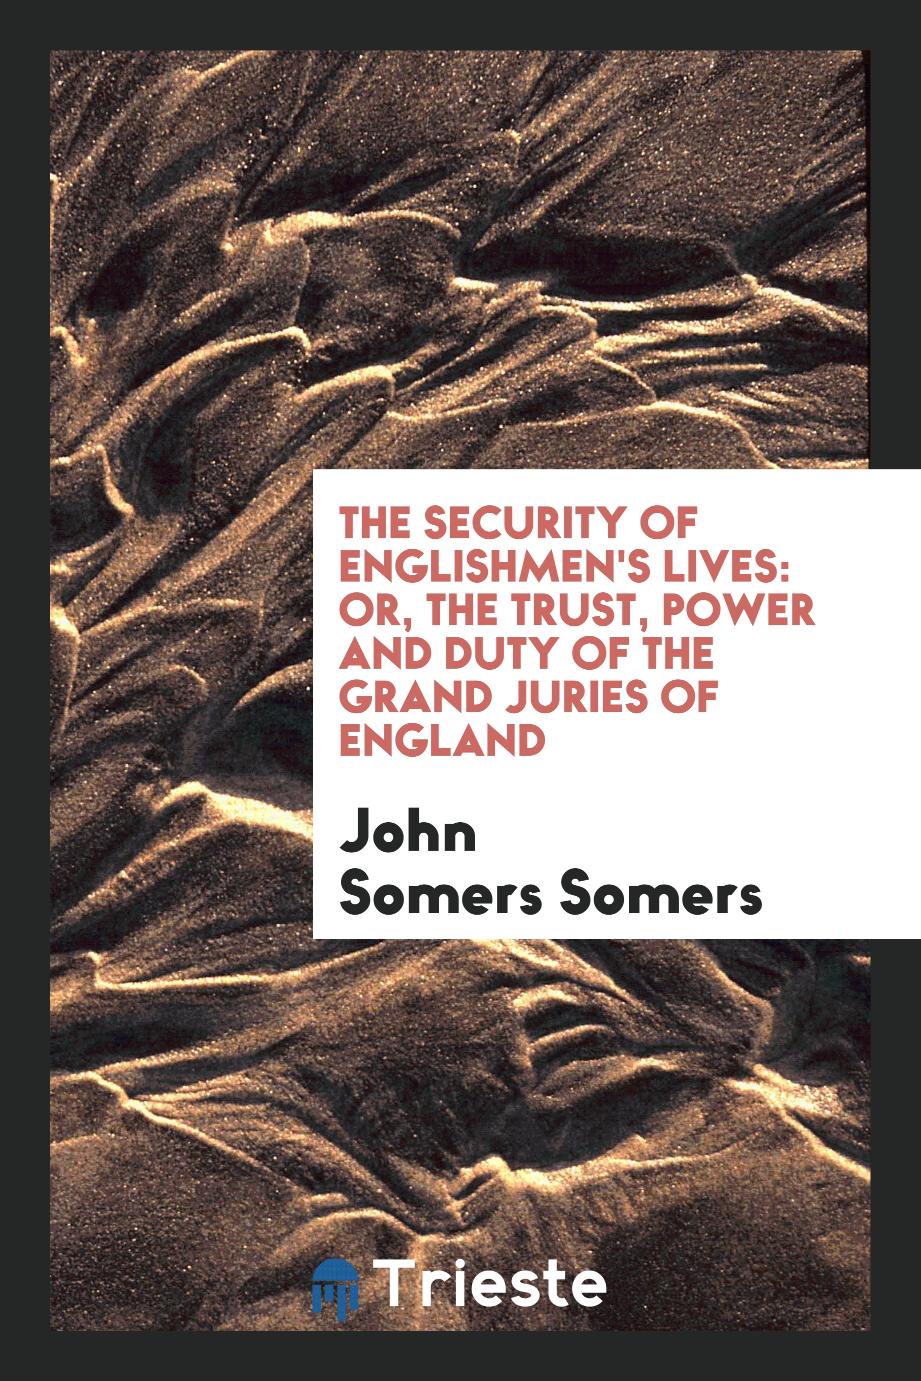 The Security of Englishmen's Lives: Or, the Trust, Power and Duty of the Grand Juries of England